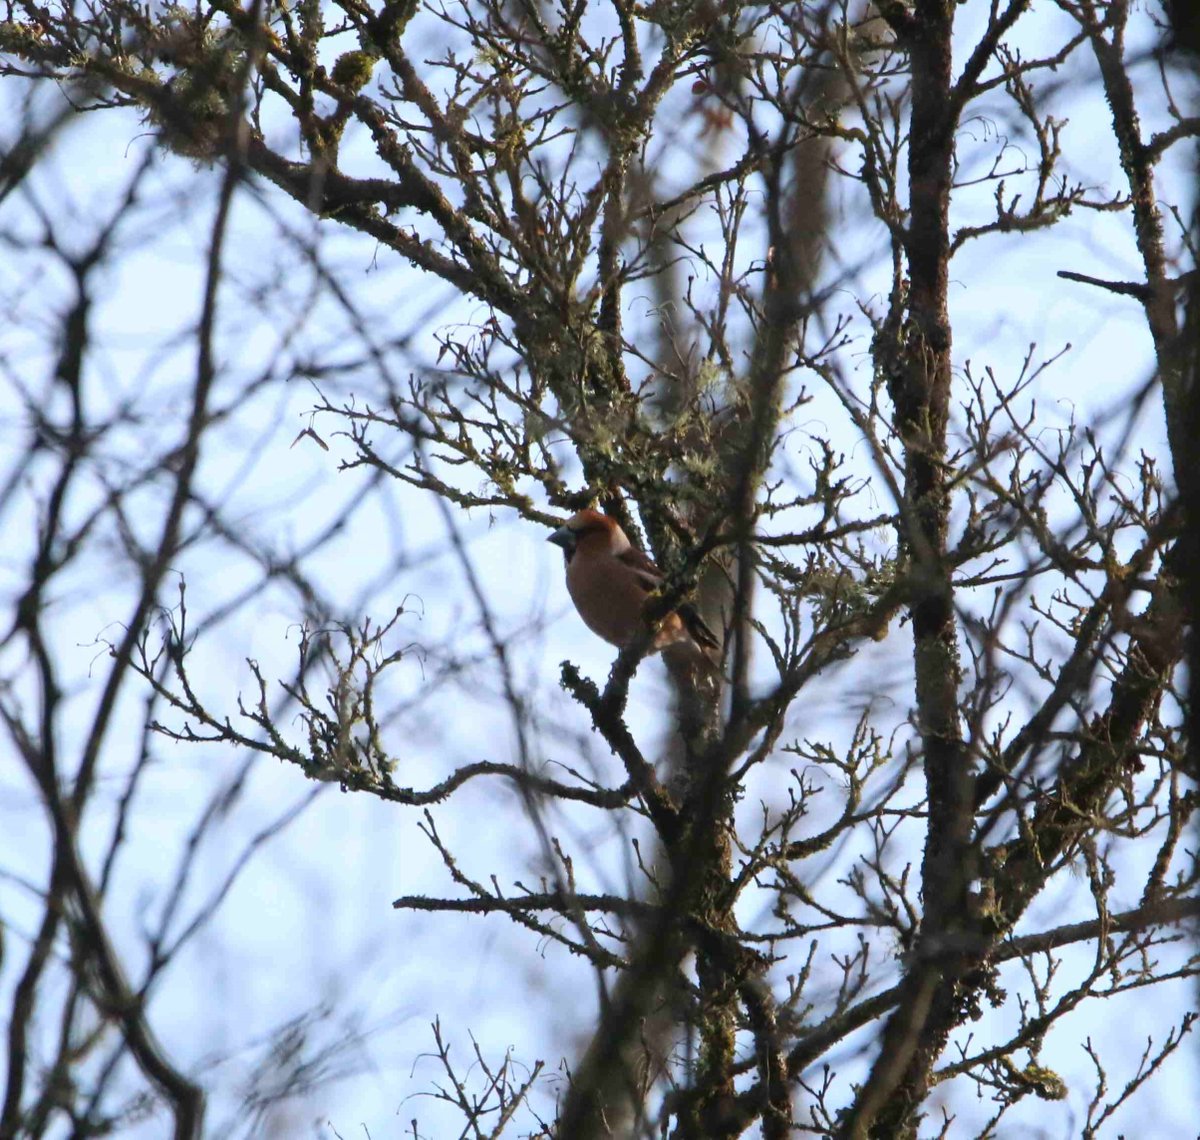 Hawfinches at a new site west of Horsham this morning close to western edge of Sussex Hornbeam zone. Singing, eating oak buds, and courtship feeding. @SussexOrnitholo @SussexBirding @HawfinchesUK